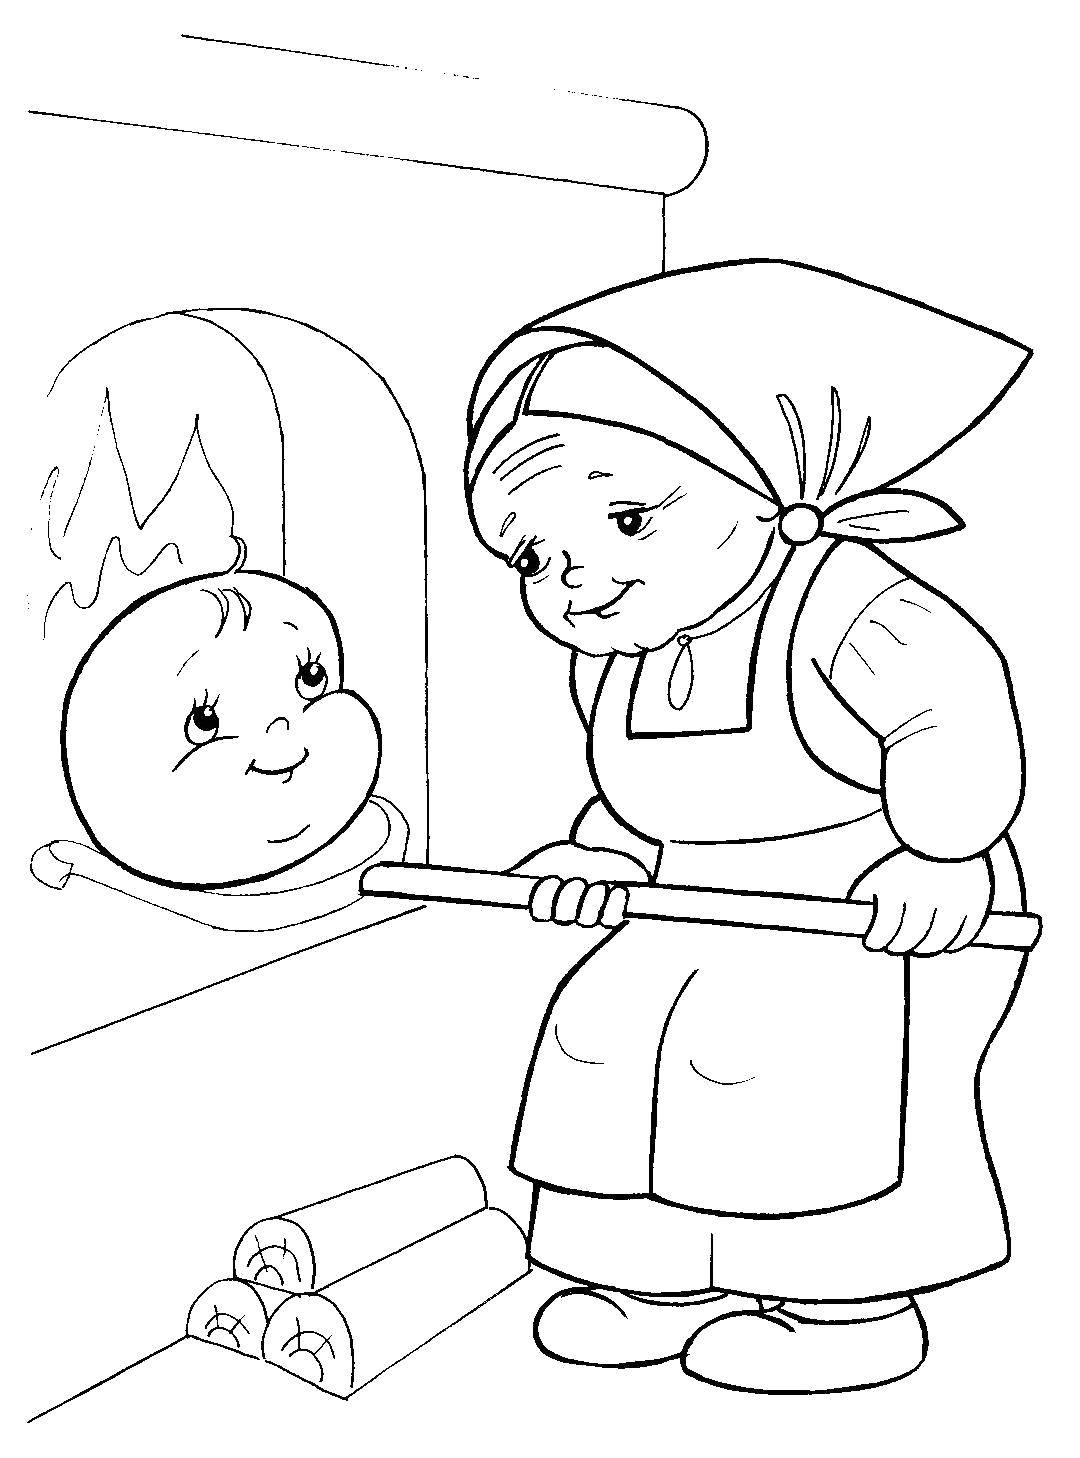 Coloring Grandmother baked bun. Category The characters from fairy tales. Tags:  Fairy Tales, Gingerbread Man.